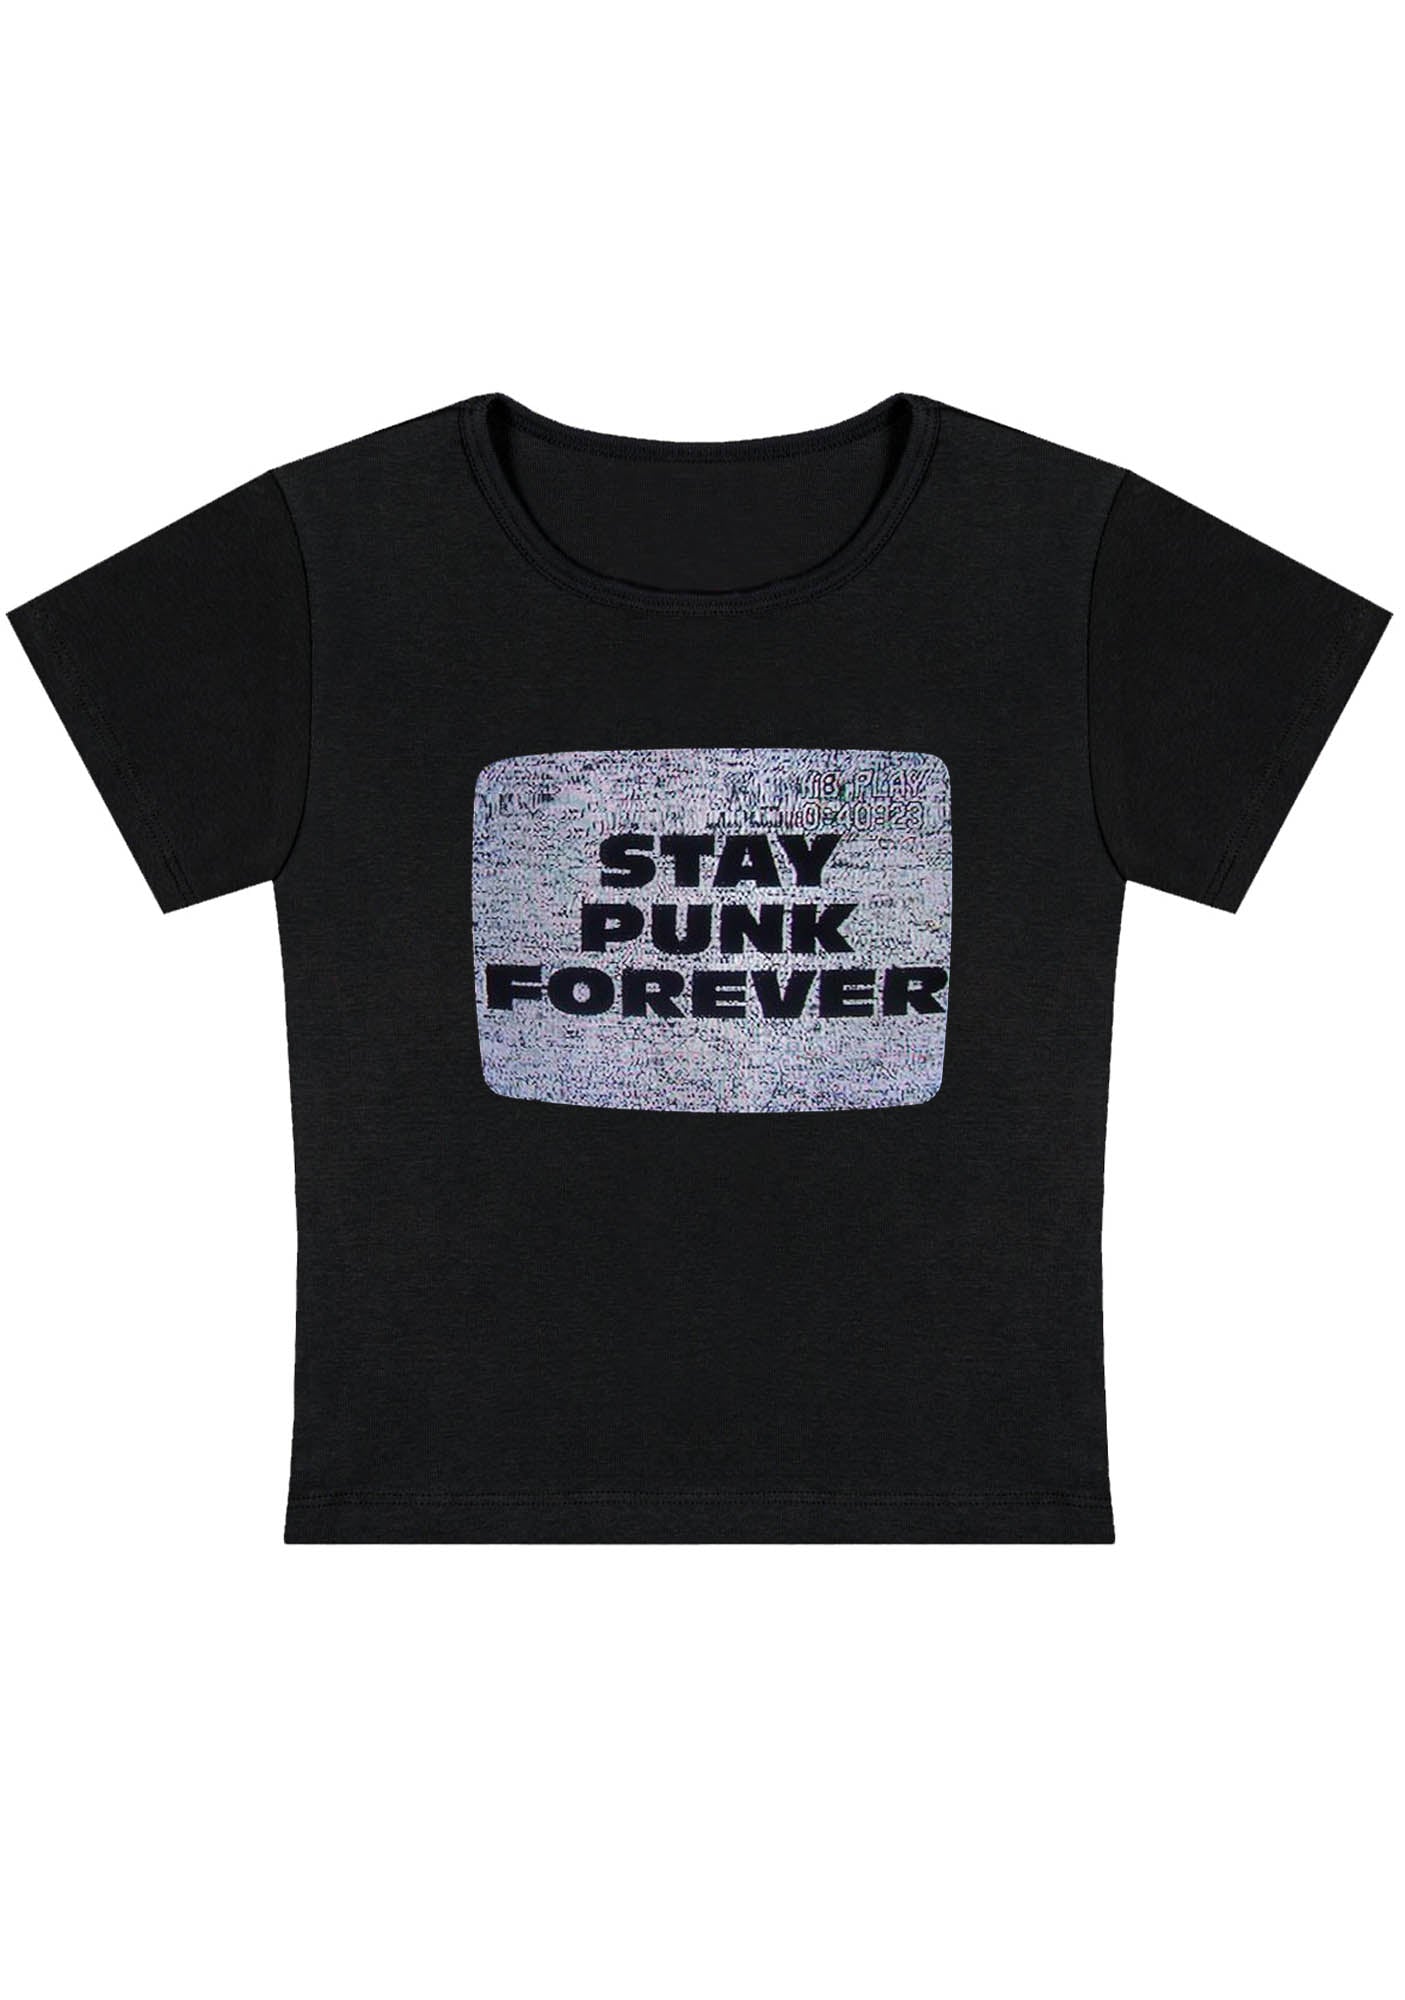 Curvy Stay Punk Forever Baby Tee